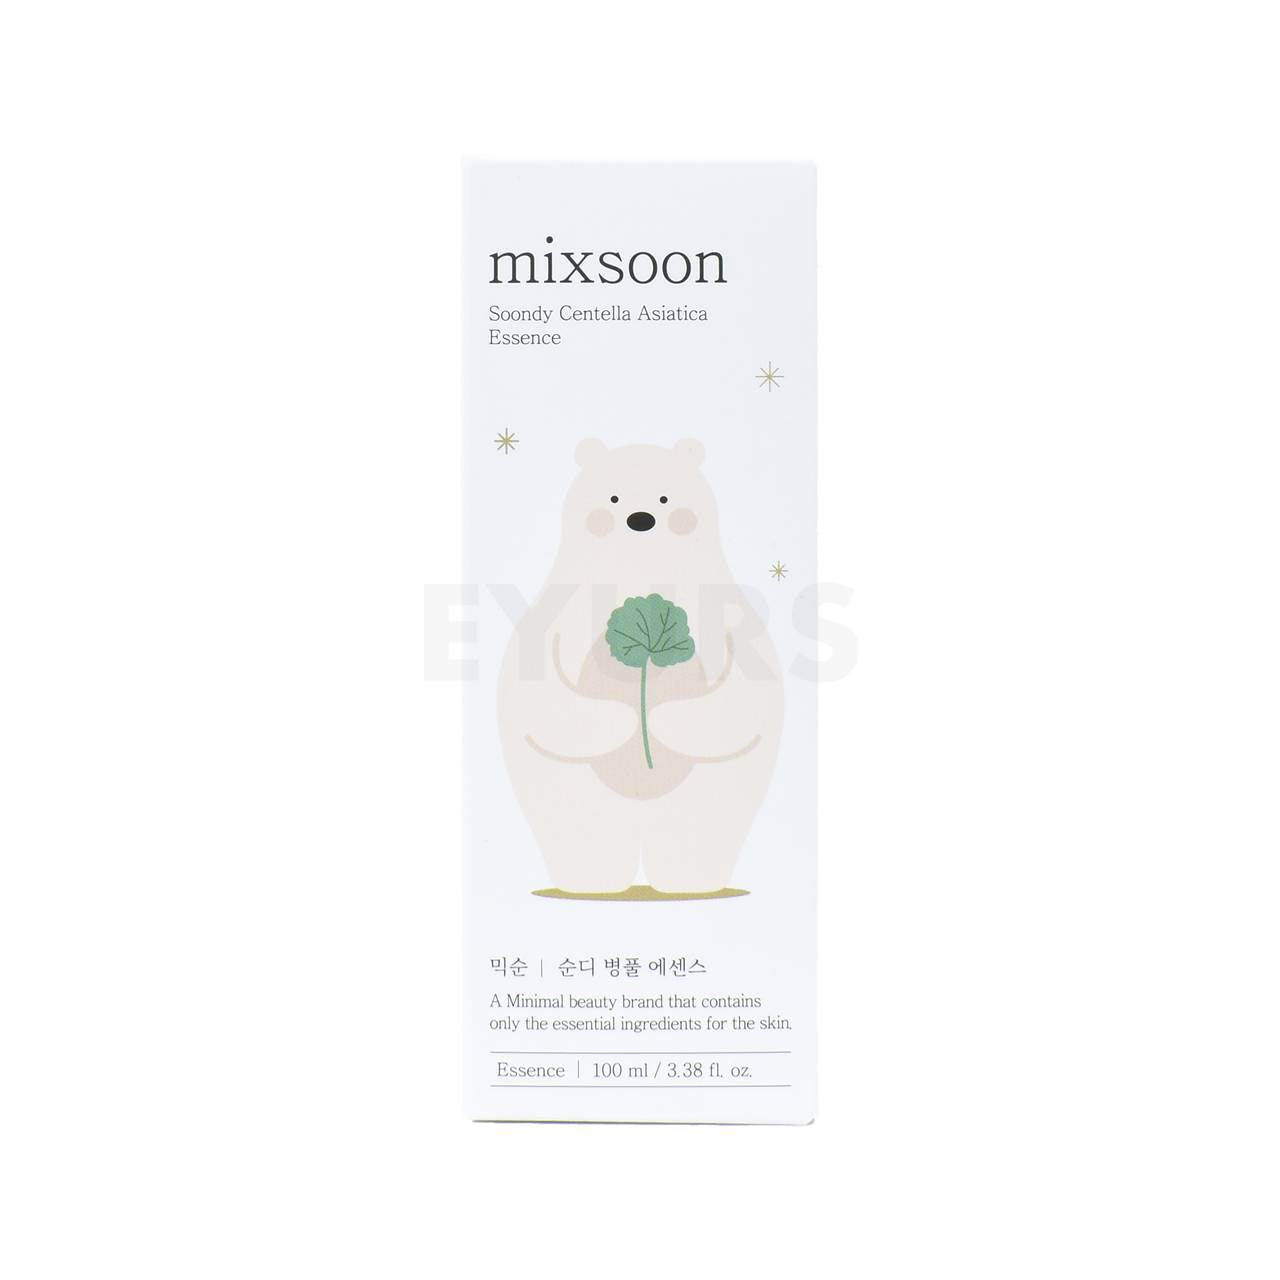 mixsoon soondy centella asiatica essence 100ml front side packaging